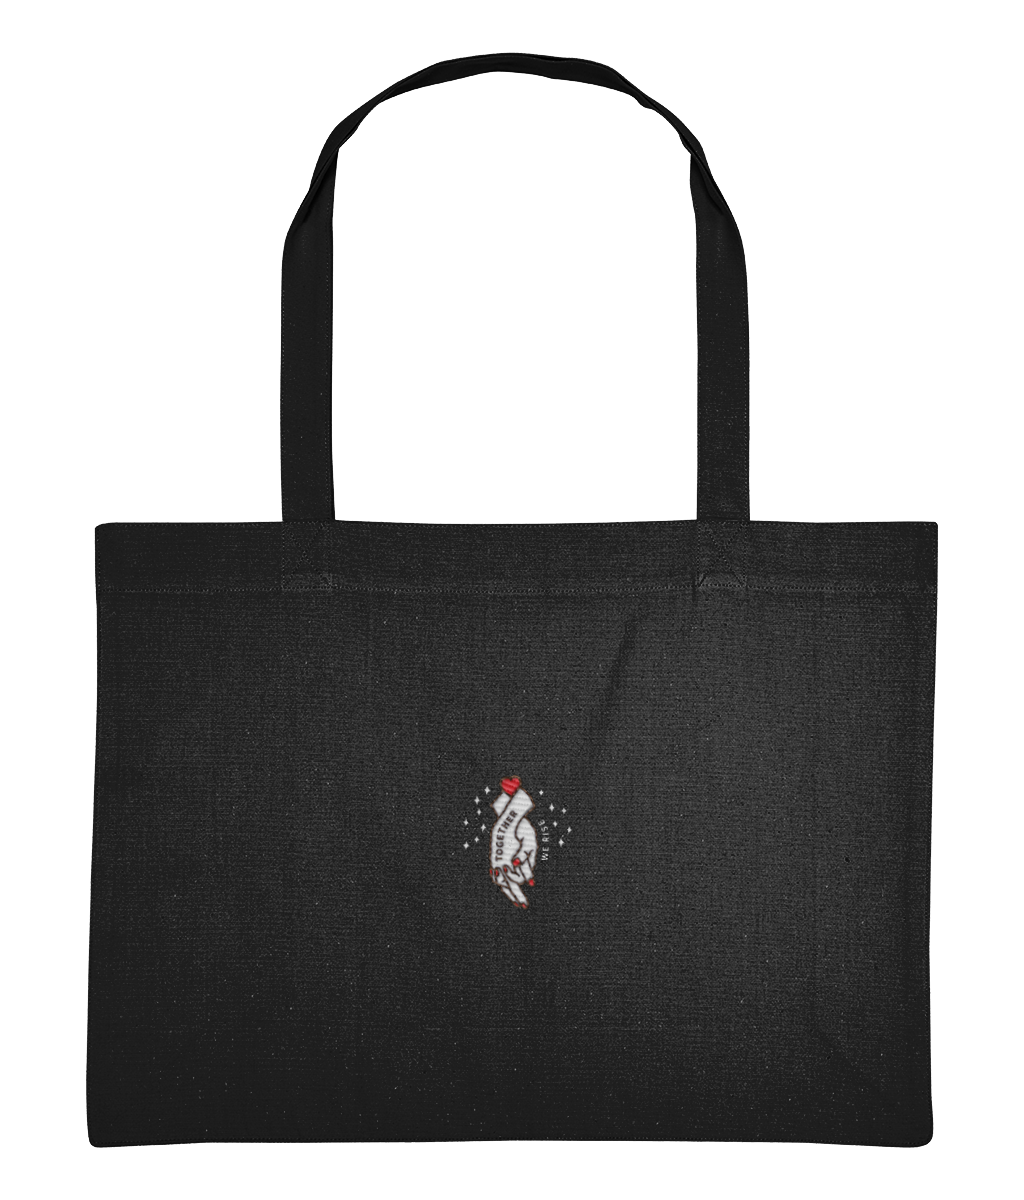 Together We Rise Embroidered Tote Bag